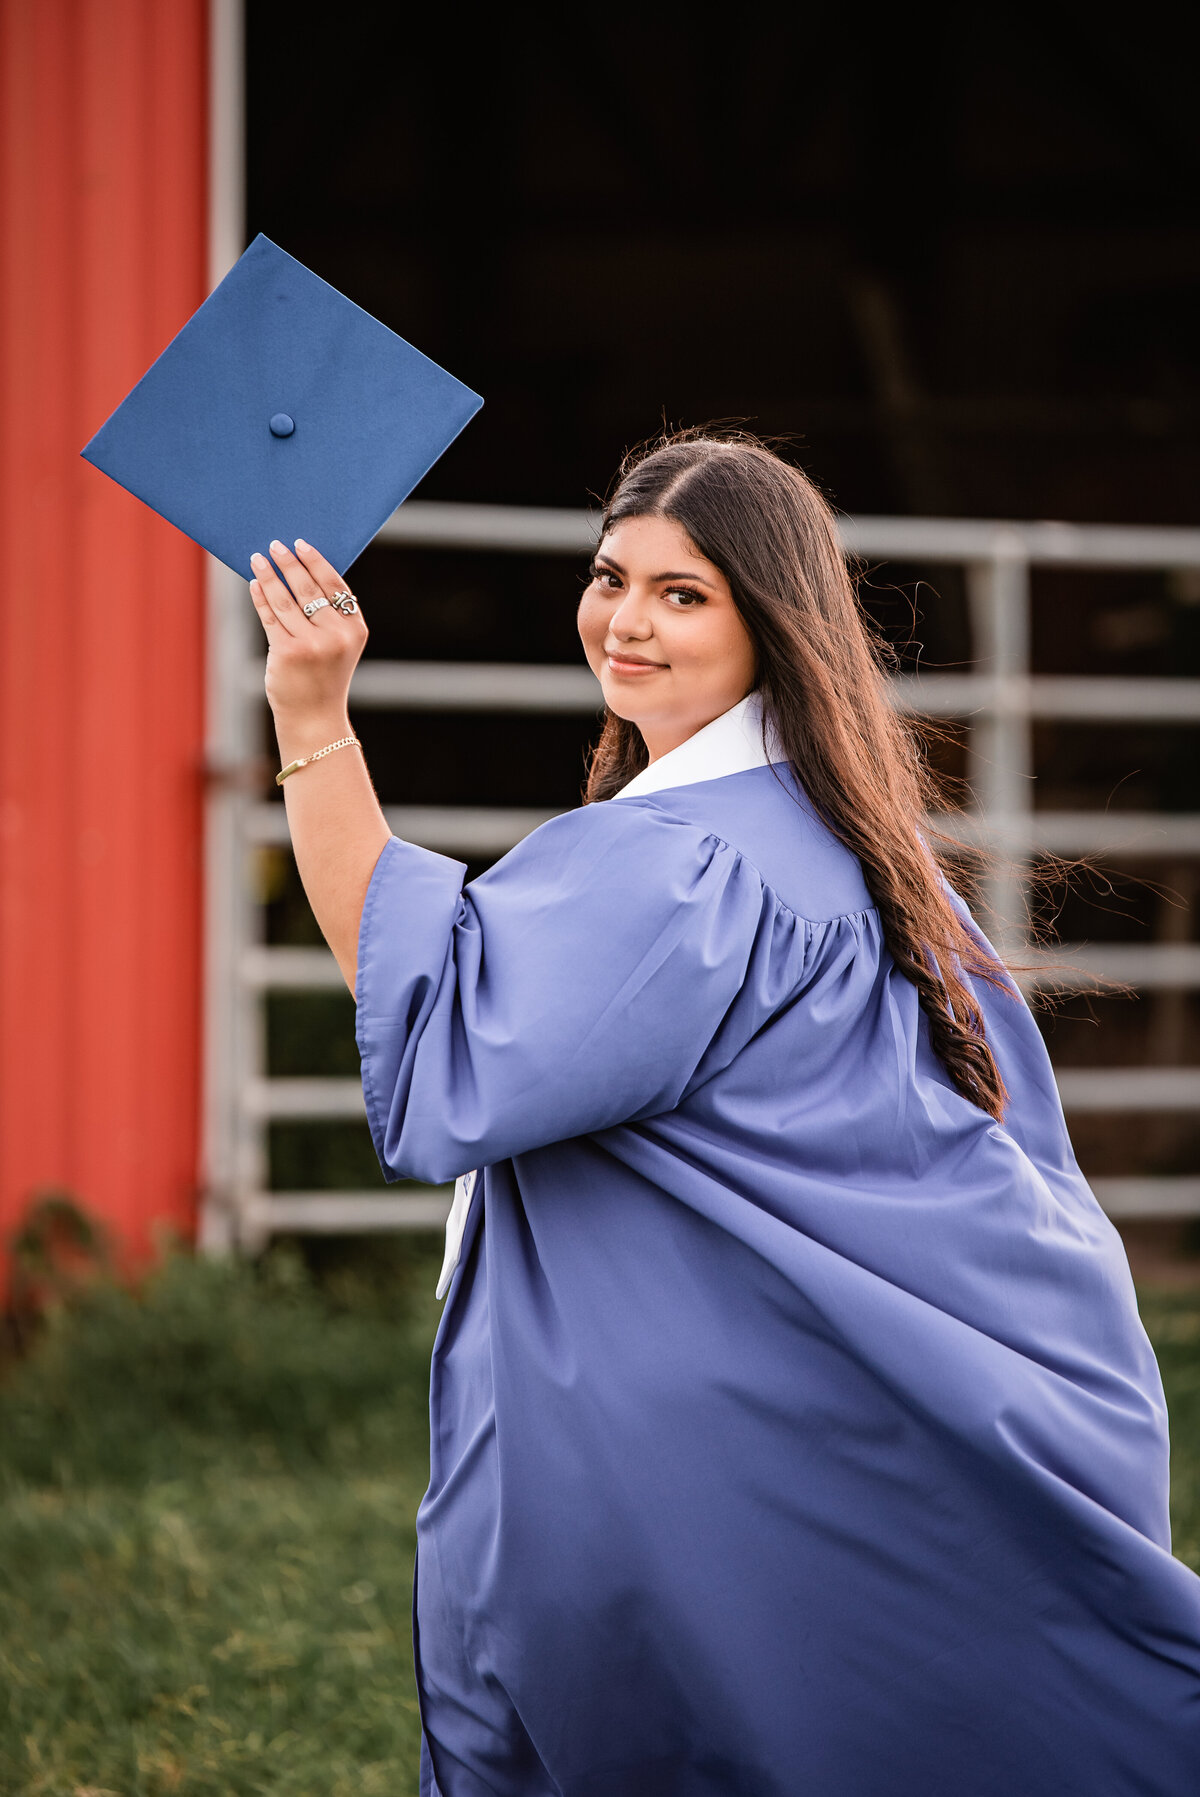 A Chavez High School senior looks over her shoulder and shows off her cap while standing in front of a red barn.